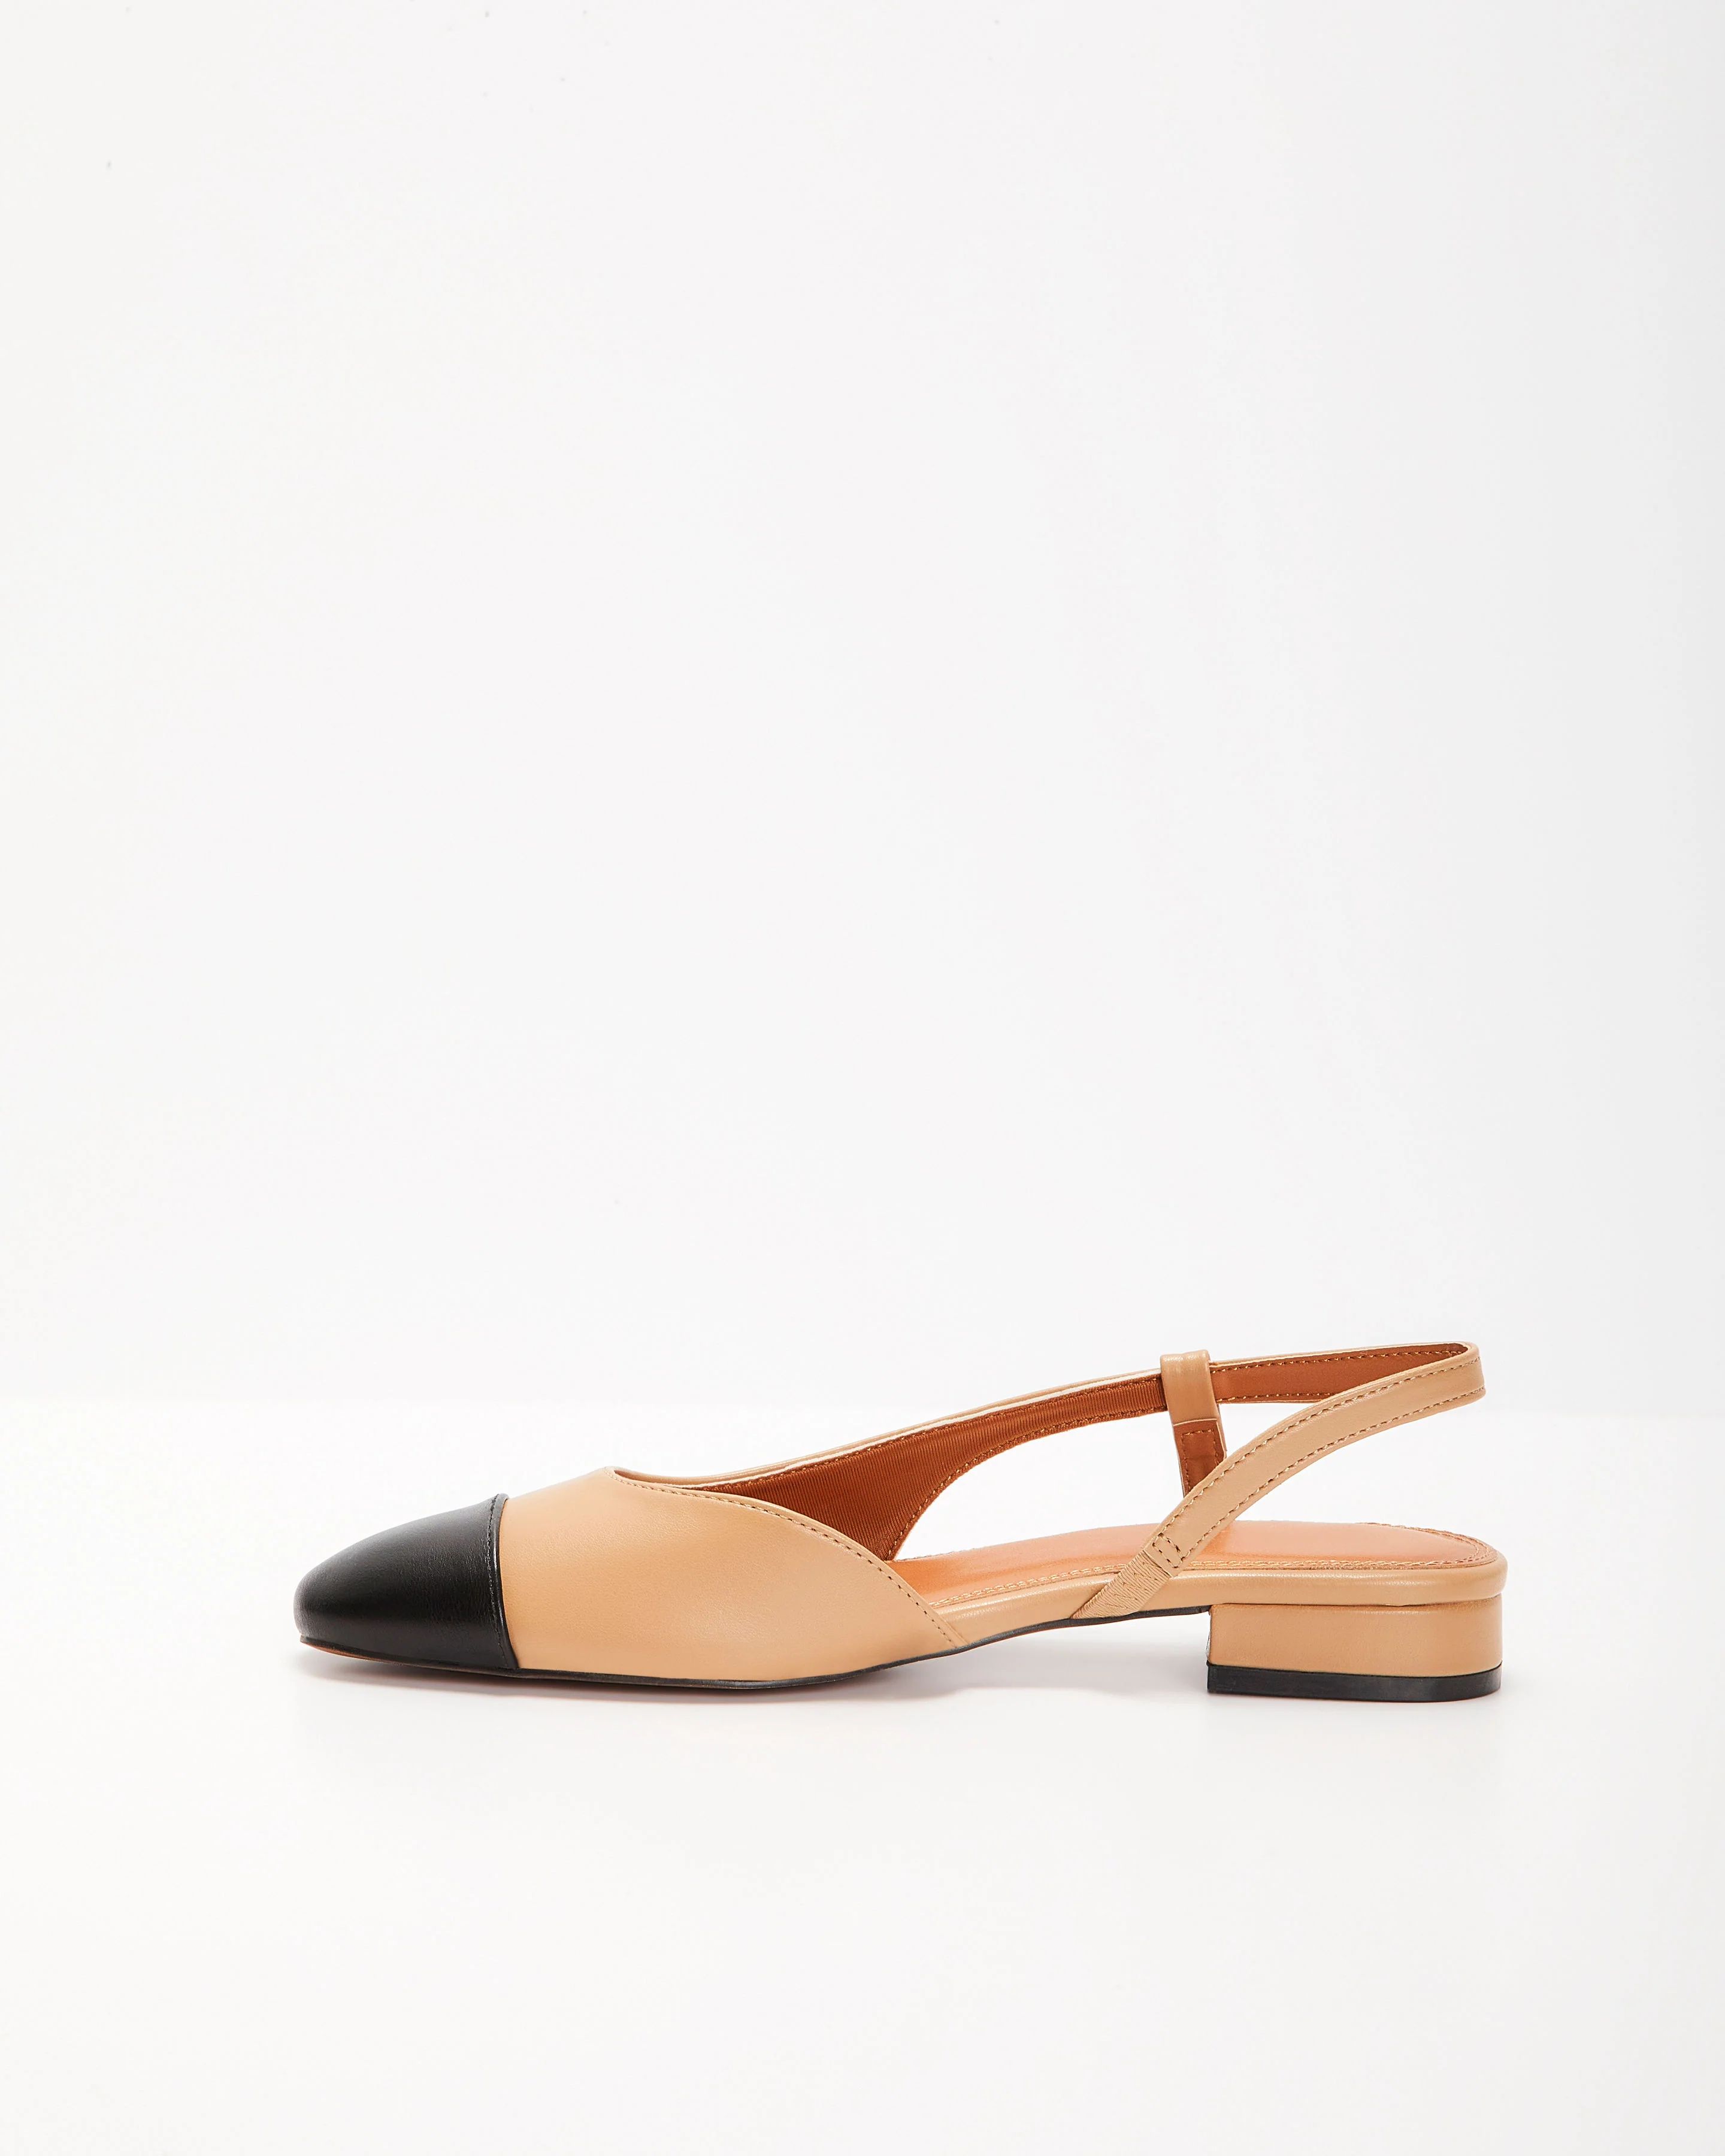 Coco Slingback Flats - Black Beige Combo | VICI Collection